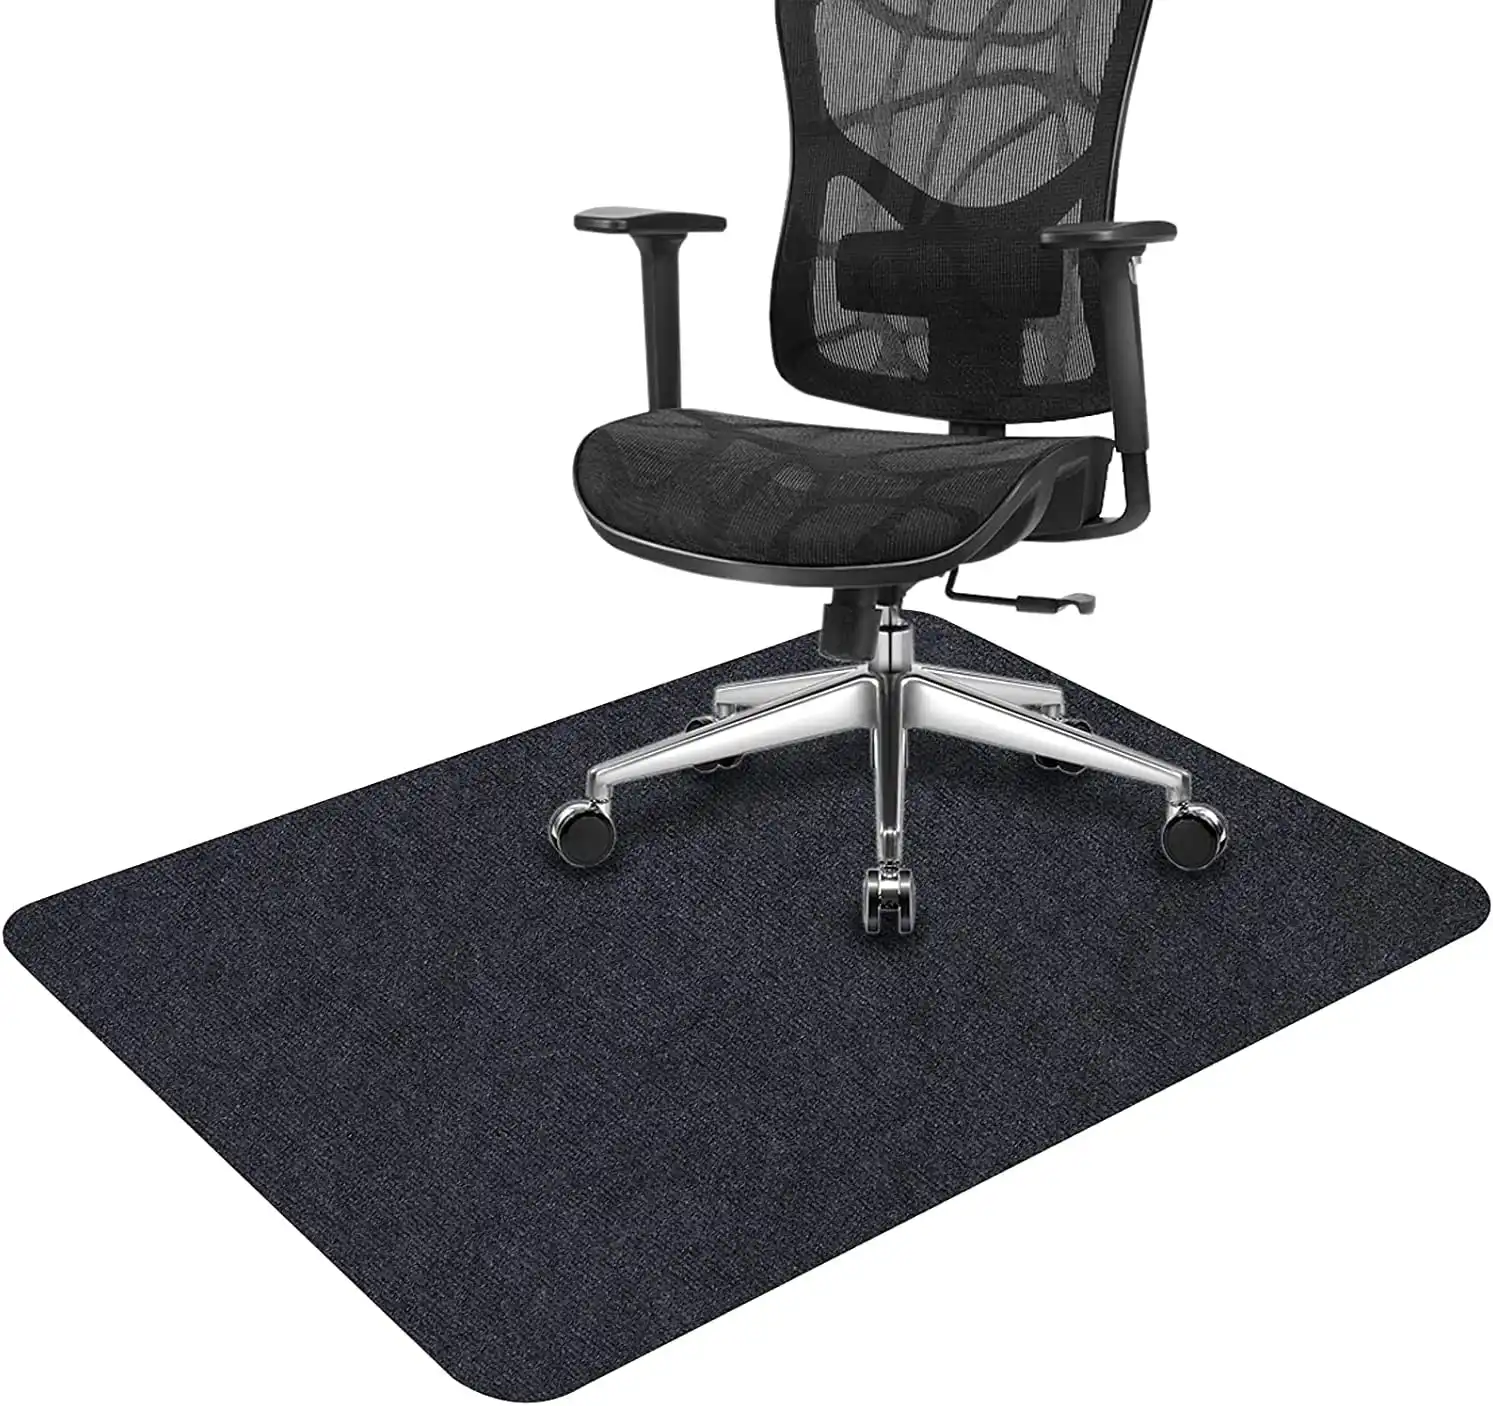 Chair Mat for Rolling Chair,90x140cm, Folded Package (Black)